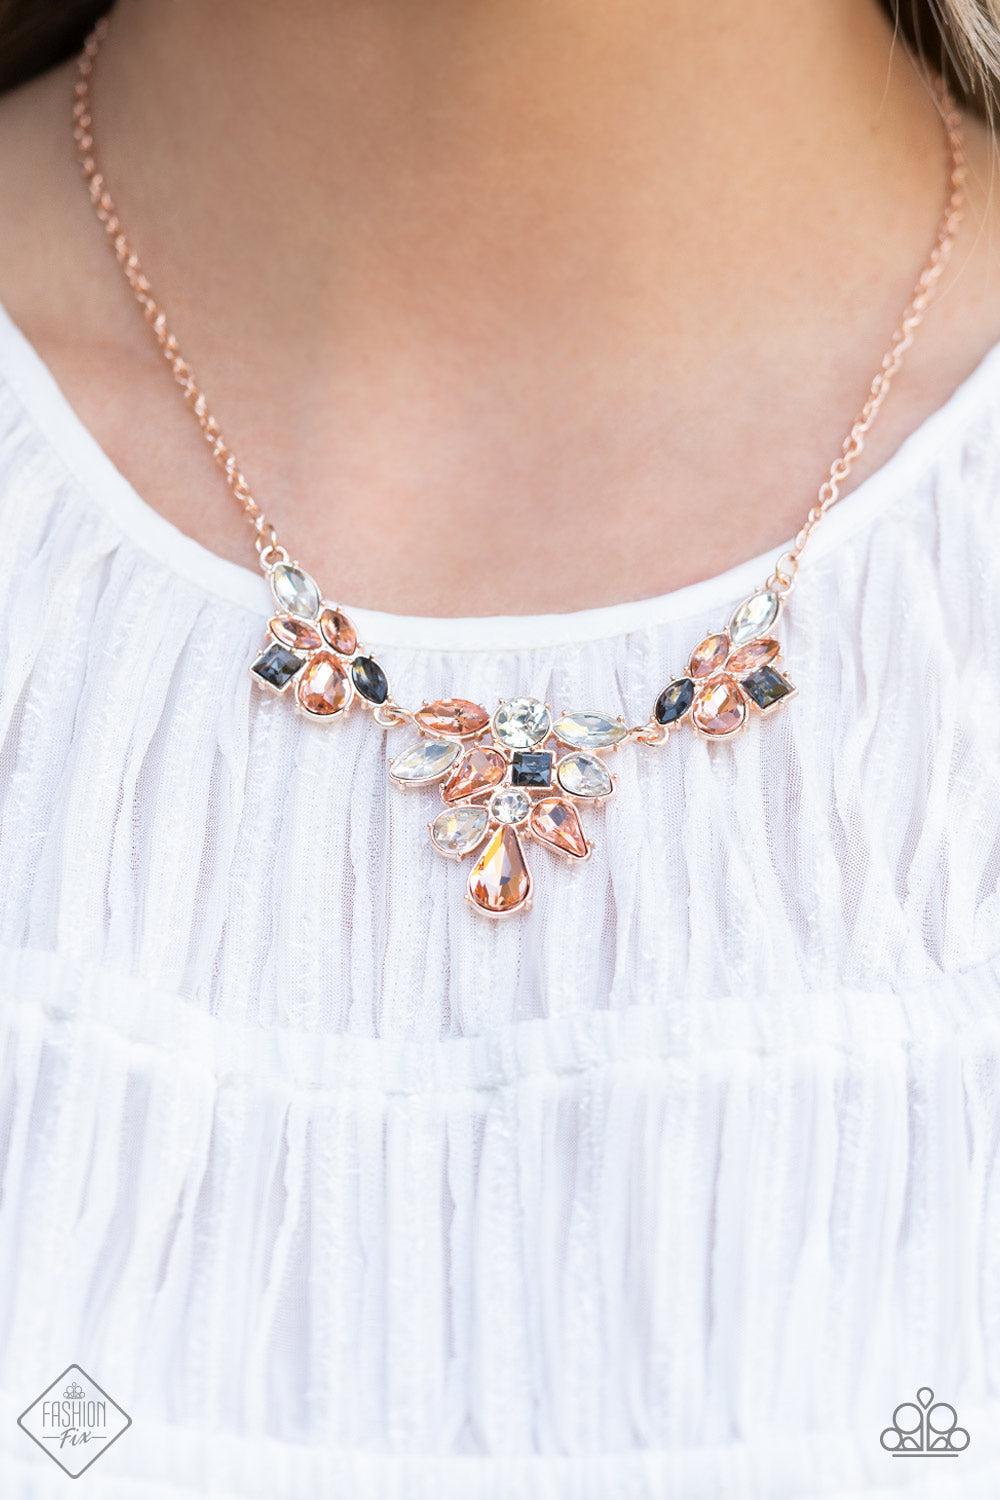 Completely Captivated Rose Gold &amp; Smoky Rhinestone Necklace - Paparazzi Accessories-on model - CarasShop.com - $5 Jewelry by Cara Jewels